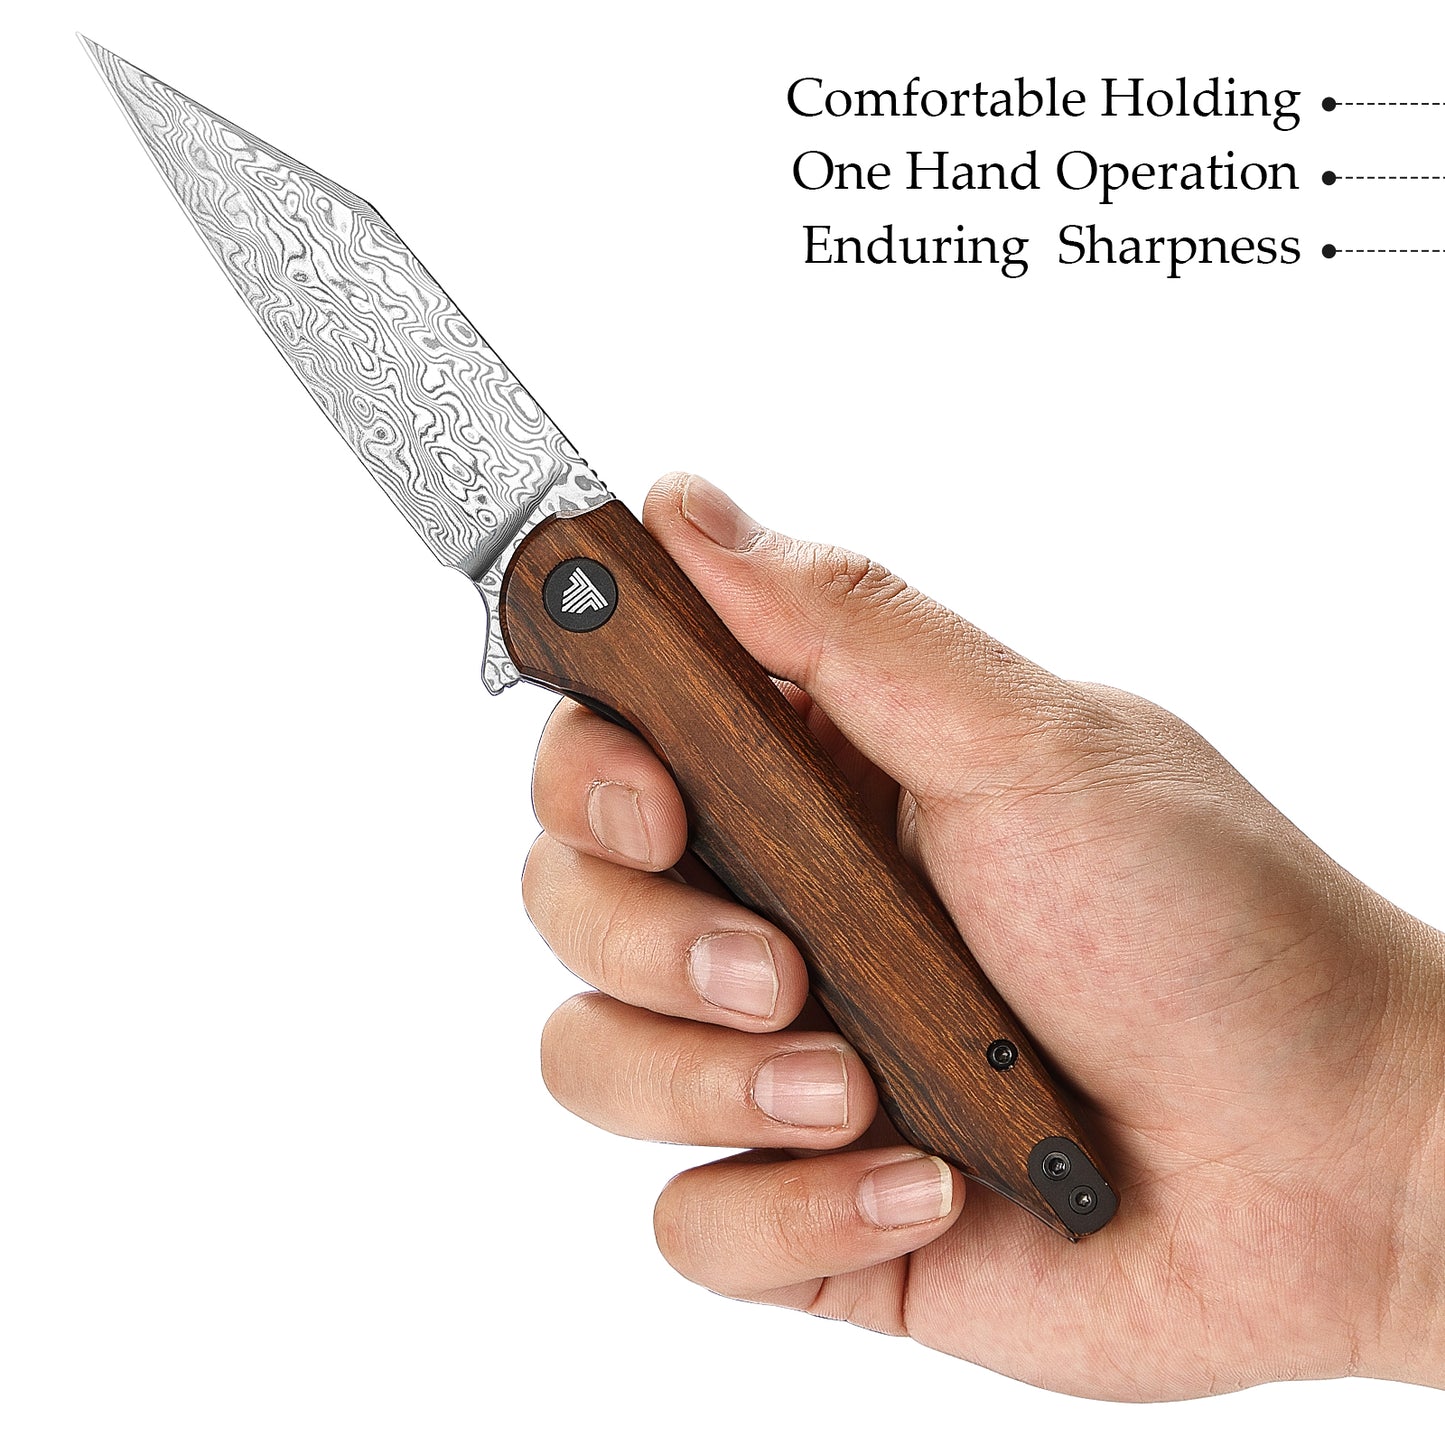 Lynx-01 Liner Lock,3.66" 110 Layers Damascus Steel,Ironwood Handle with Reversible Clip